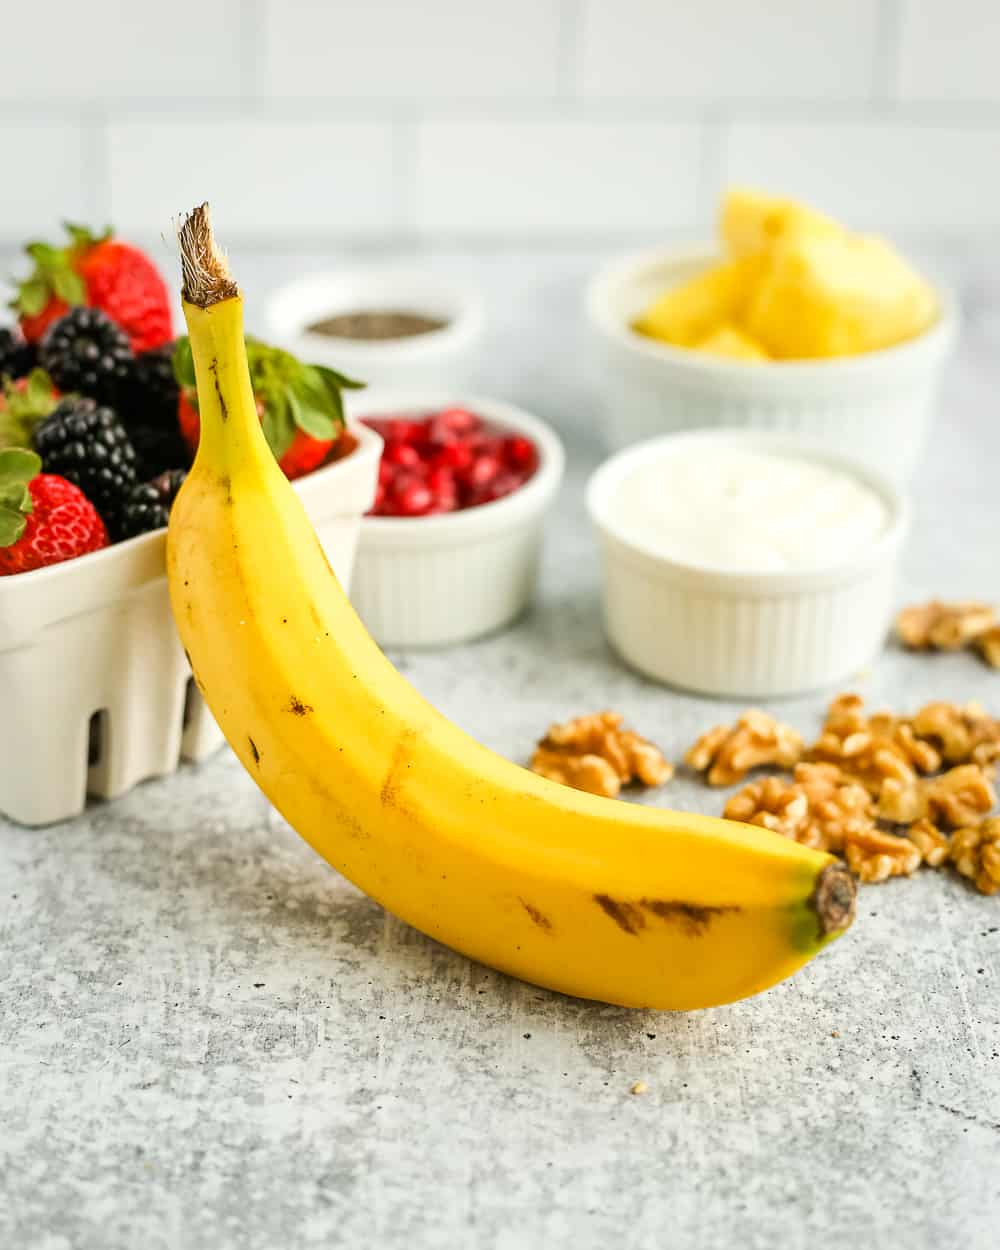 An unpeeled banana on a kitchen counter, propped up by a container of fresh berries and surrounded by other fruit salad ingredients